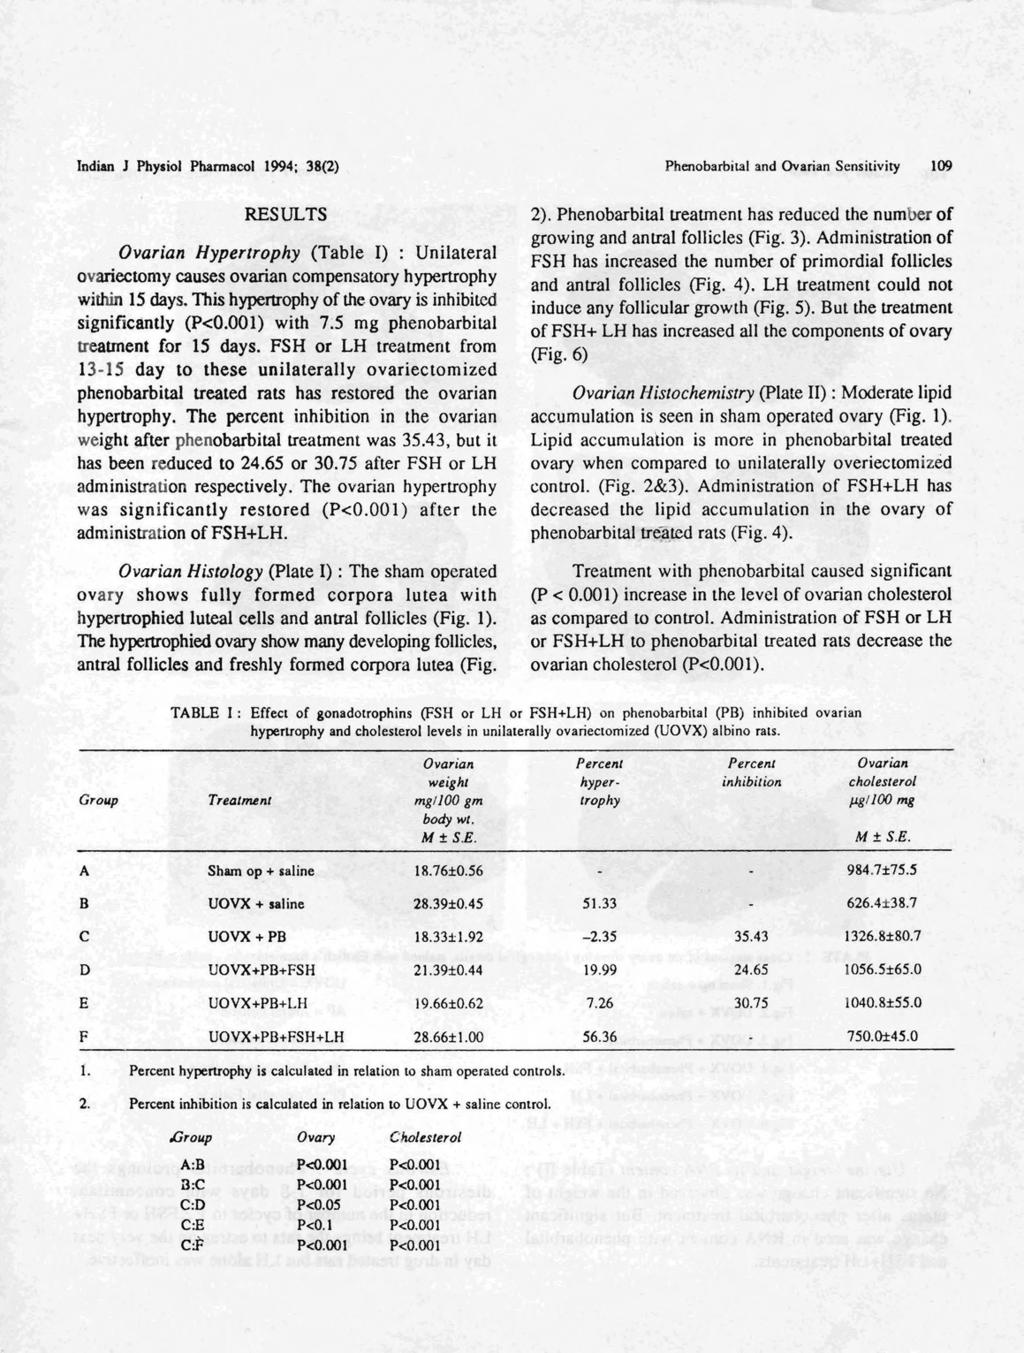 Indian J Physiol Pharmacol 1994; 38(2) Phenobarbital and Ovarian Sensitivity 109 RESULTS Ovarian Hypertrophy (Table I) : Unilateral ovariectomy causes ovarian compensatory hypertrophy within 15 days.